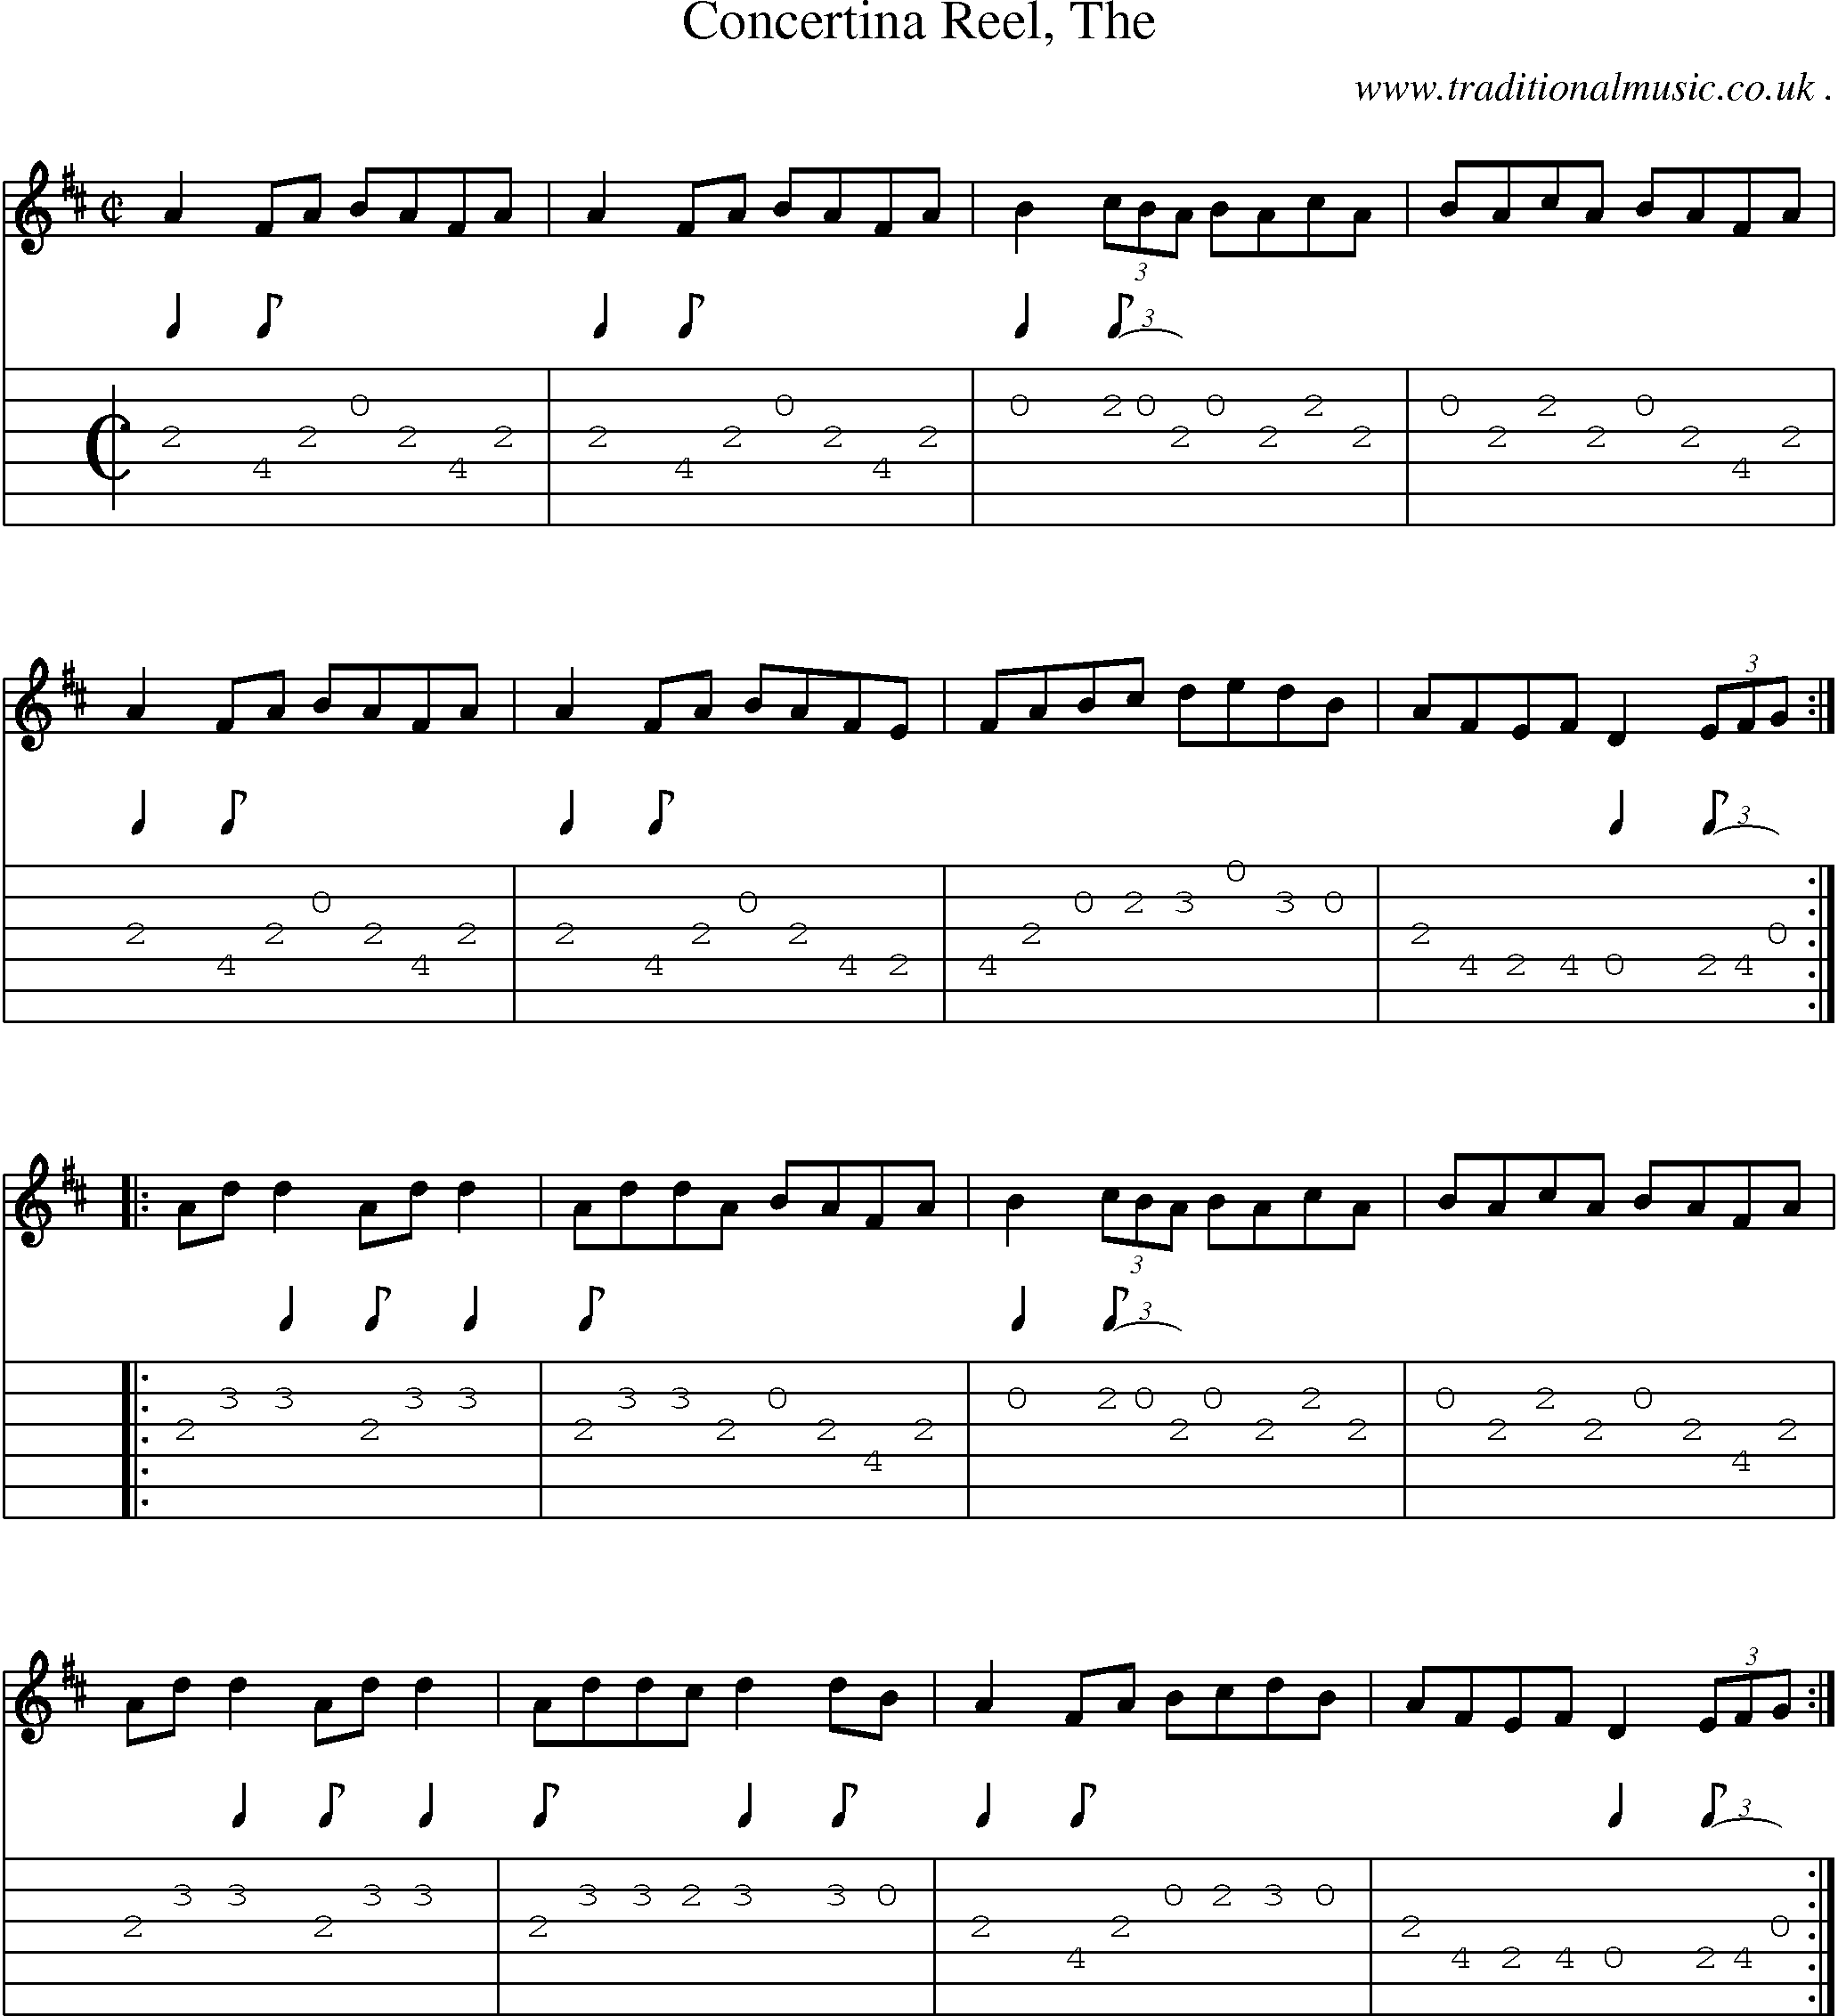 Music Score and Guitar Tabs for Concertina Reel The